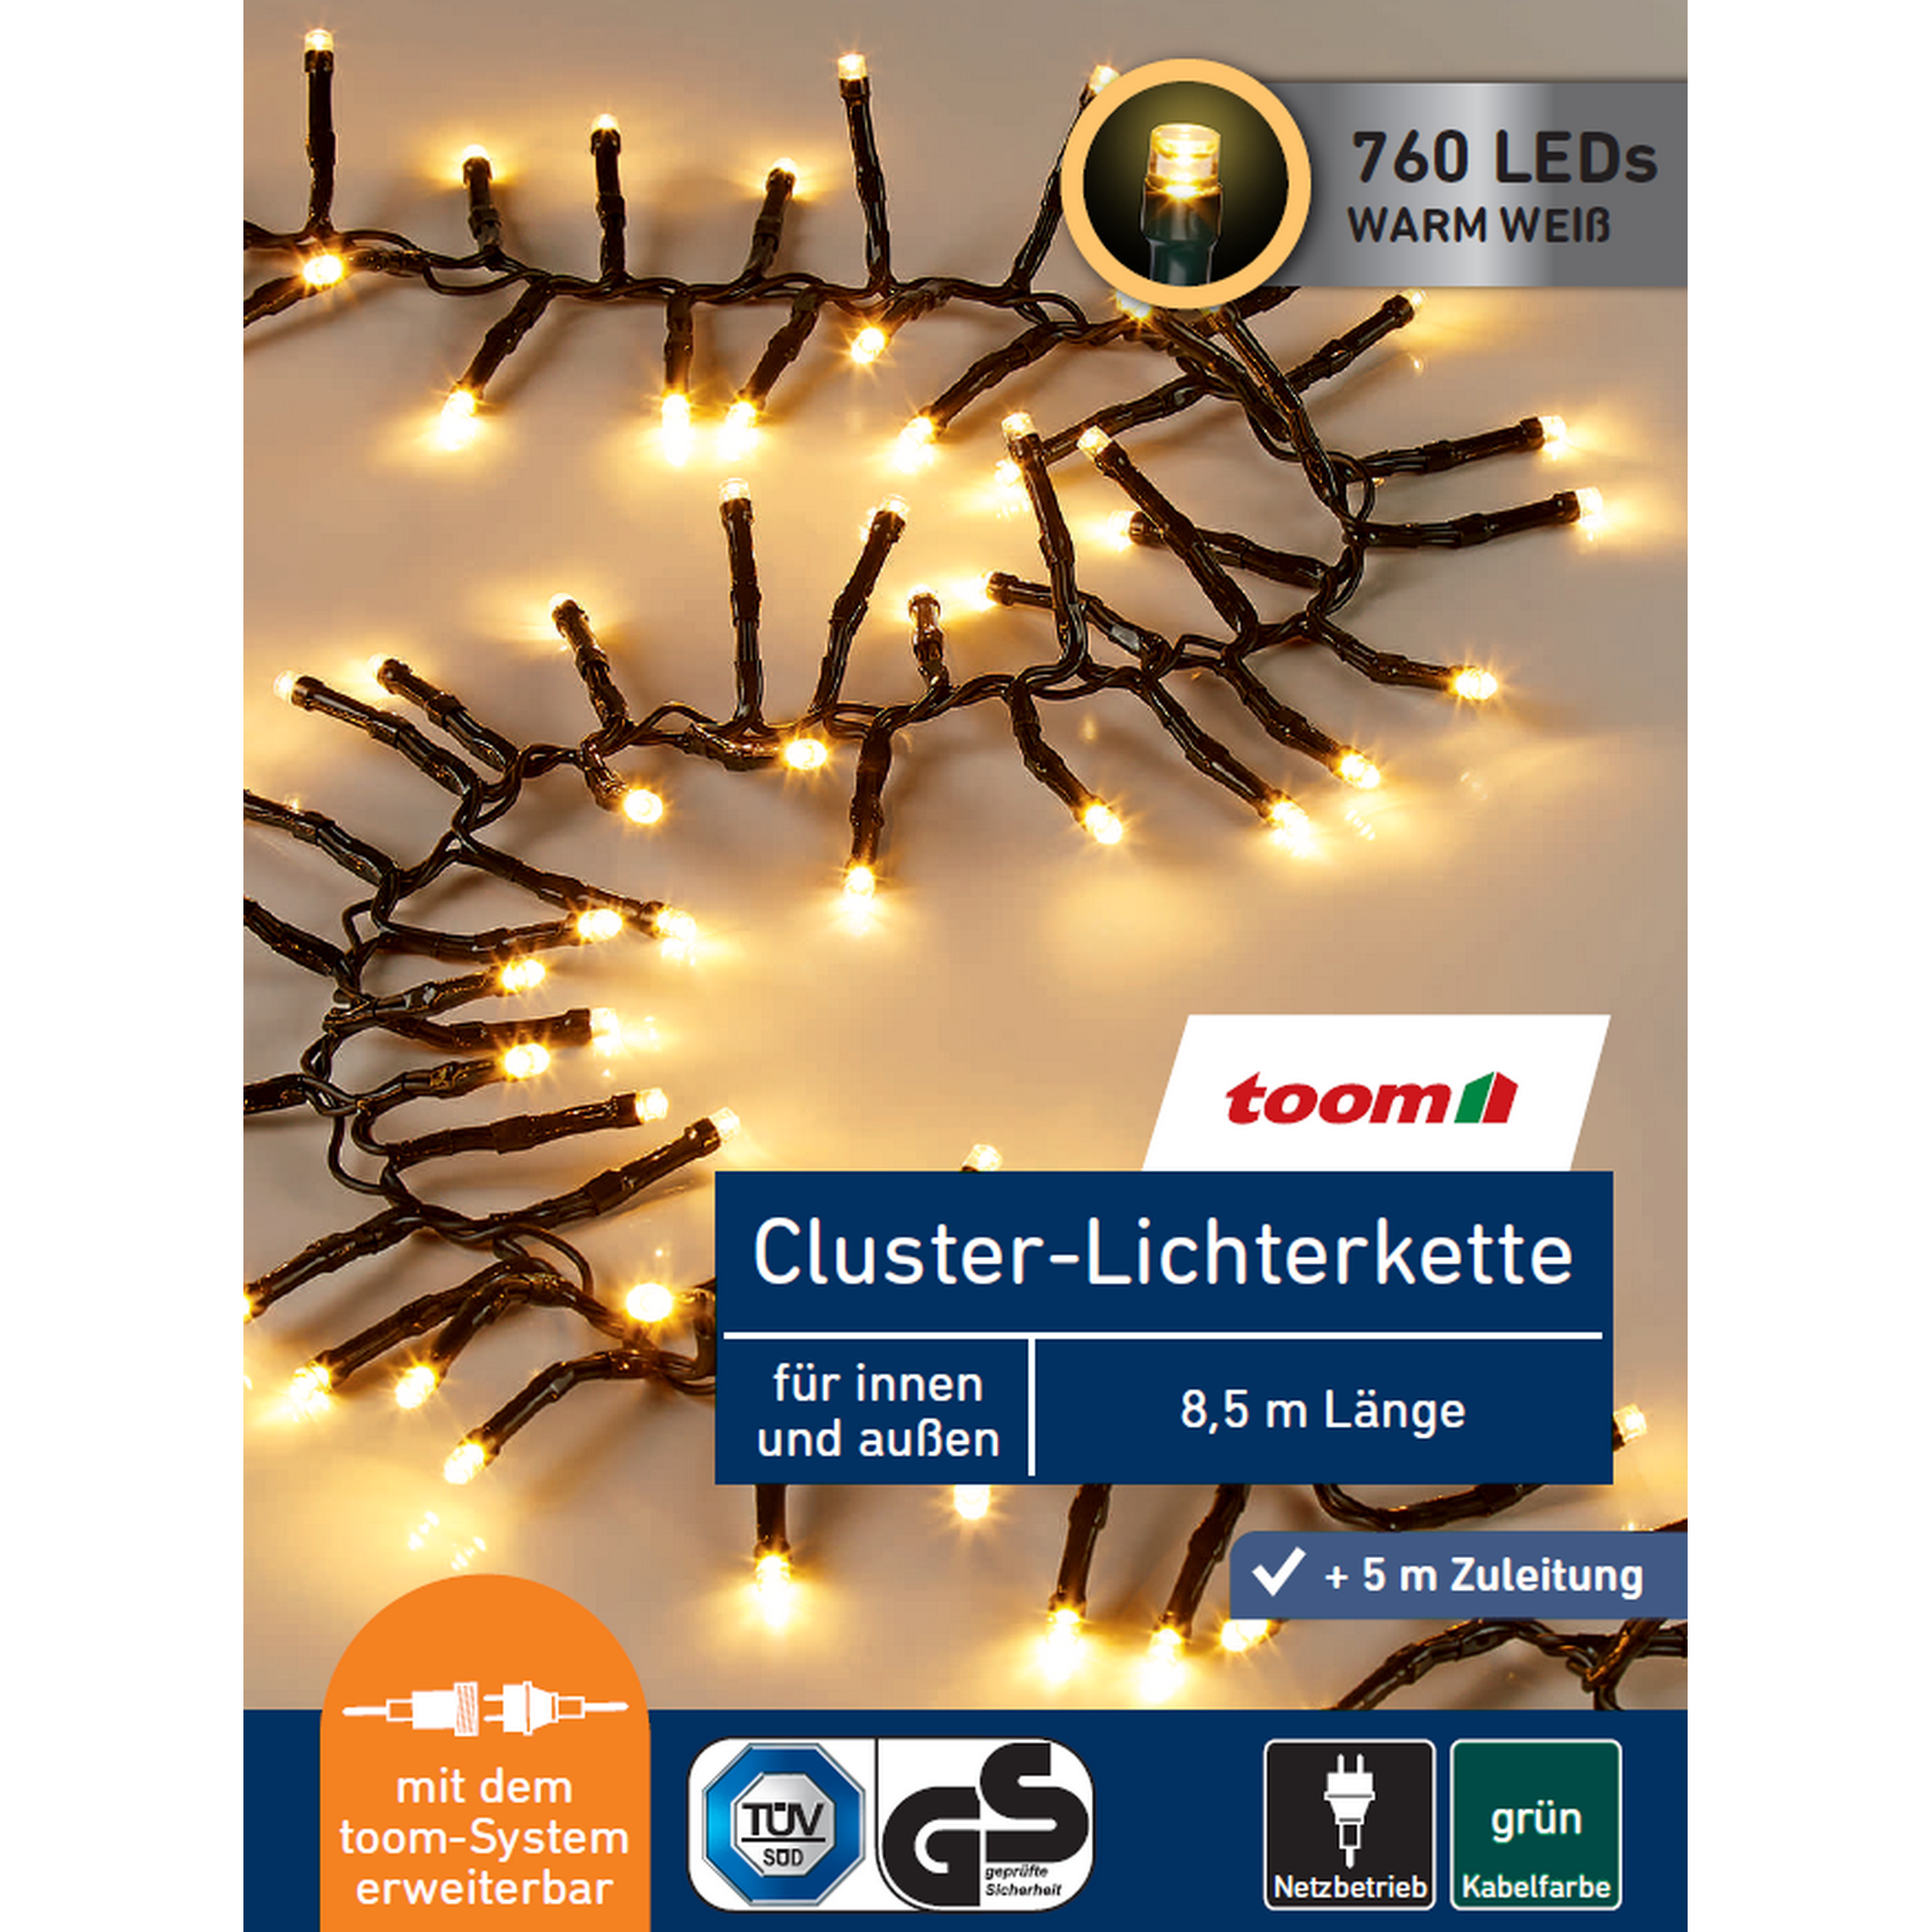 LED-Cluster-Lichterkette 760 LEDs warmweiß 850 cm + product picture